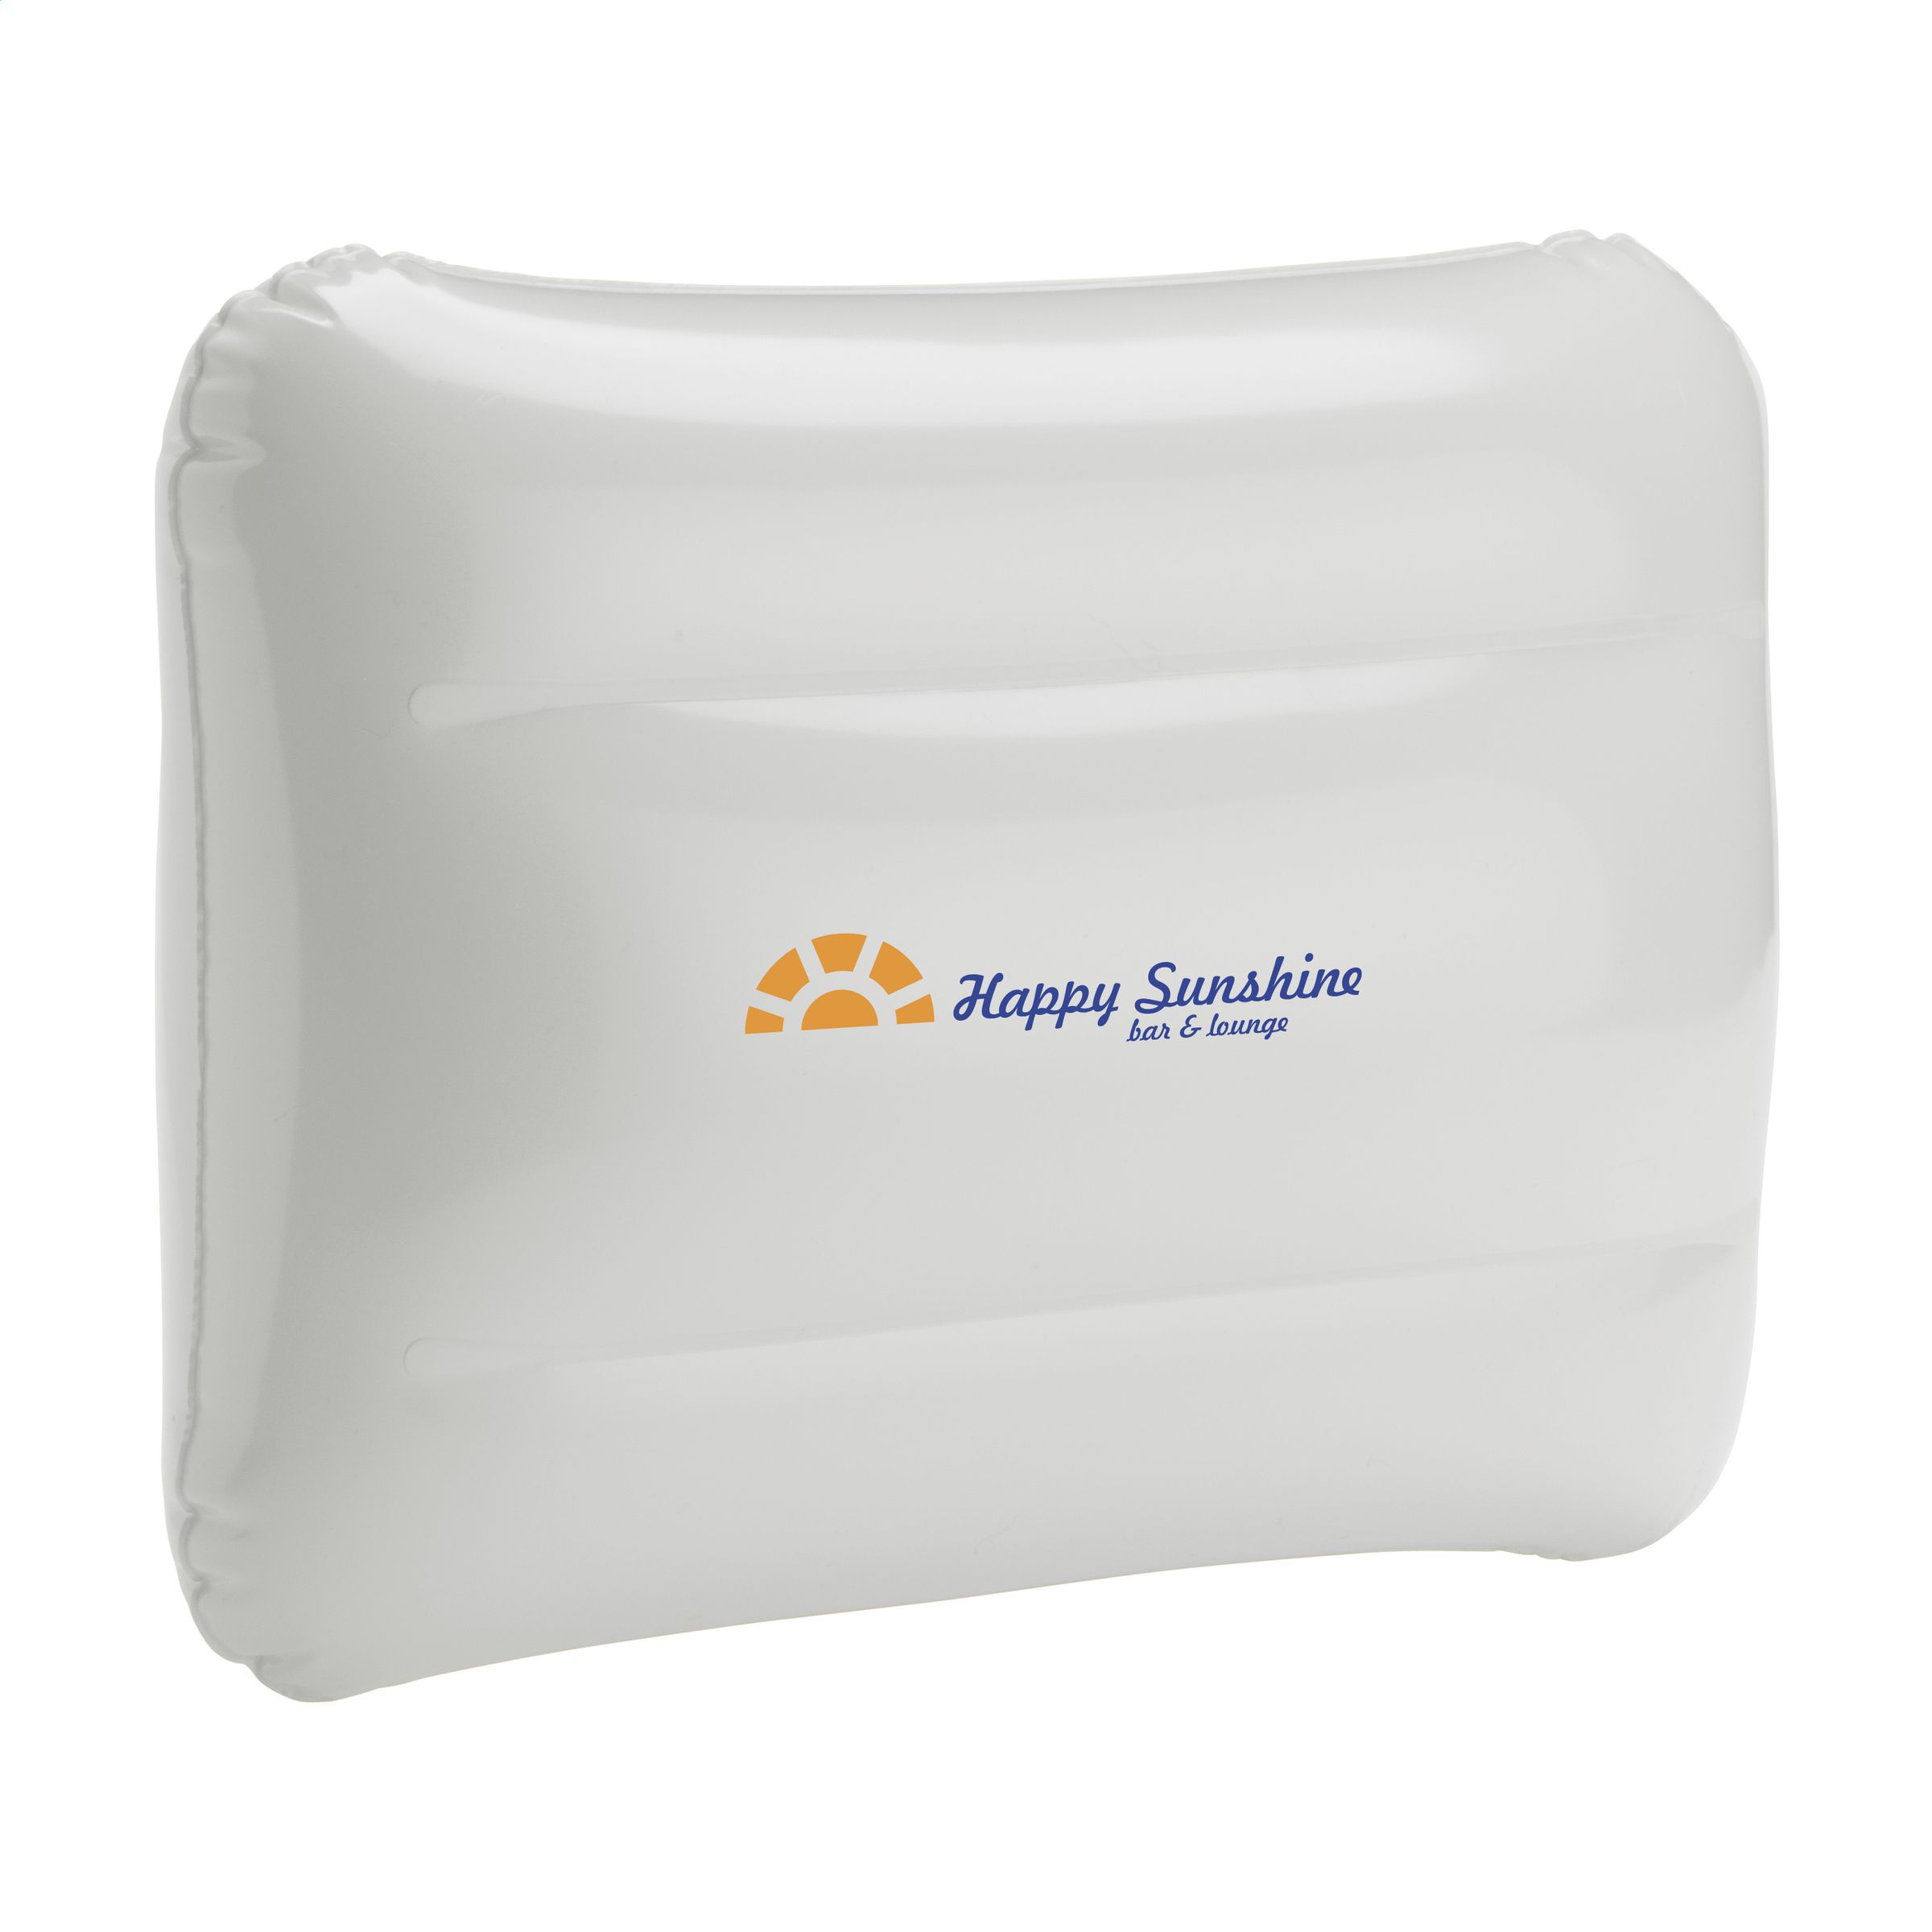 Inflatable PVC Safety Valve Pillow - Uist